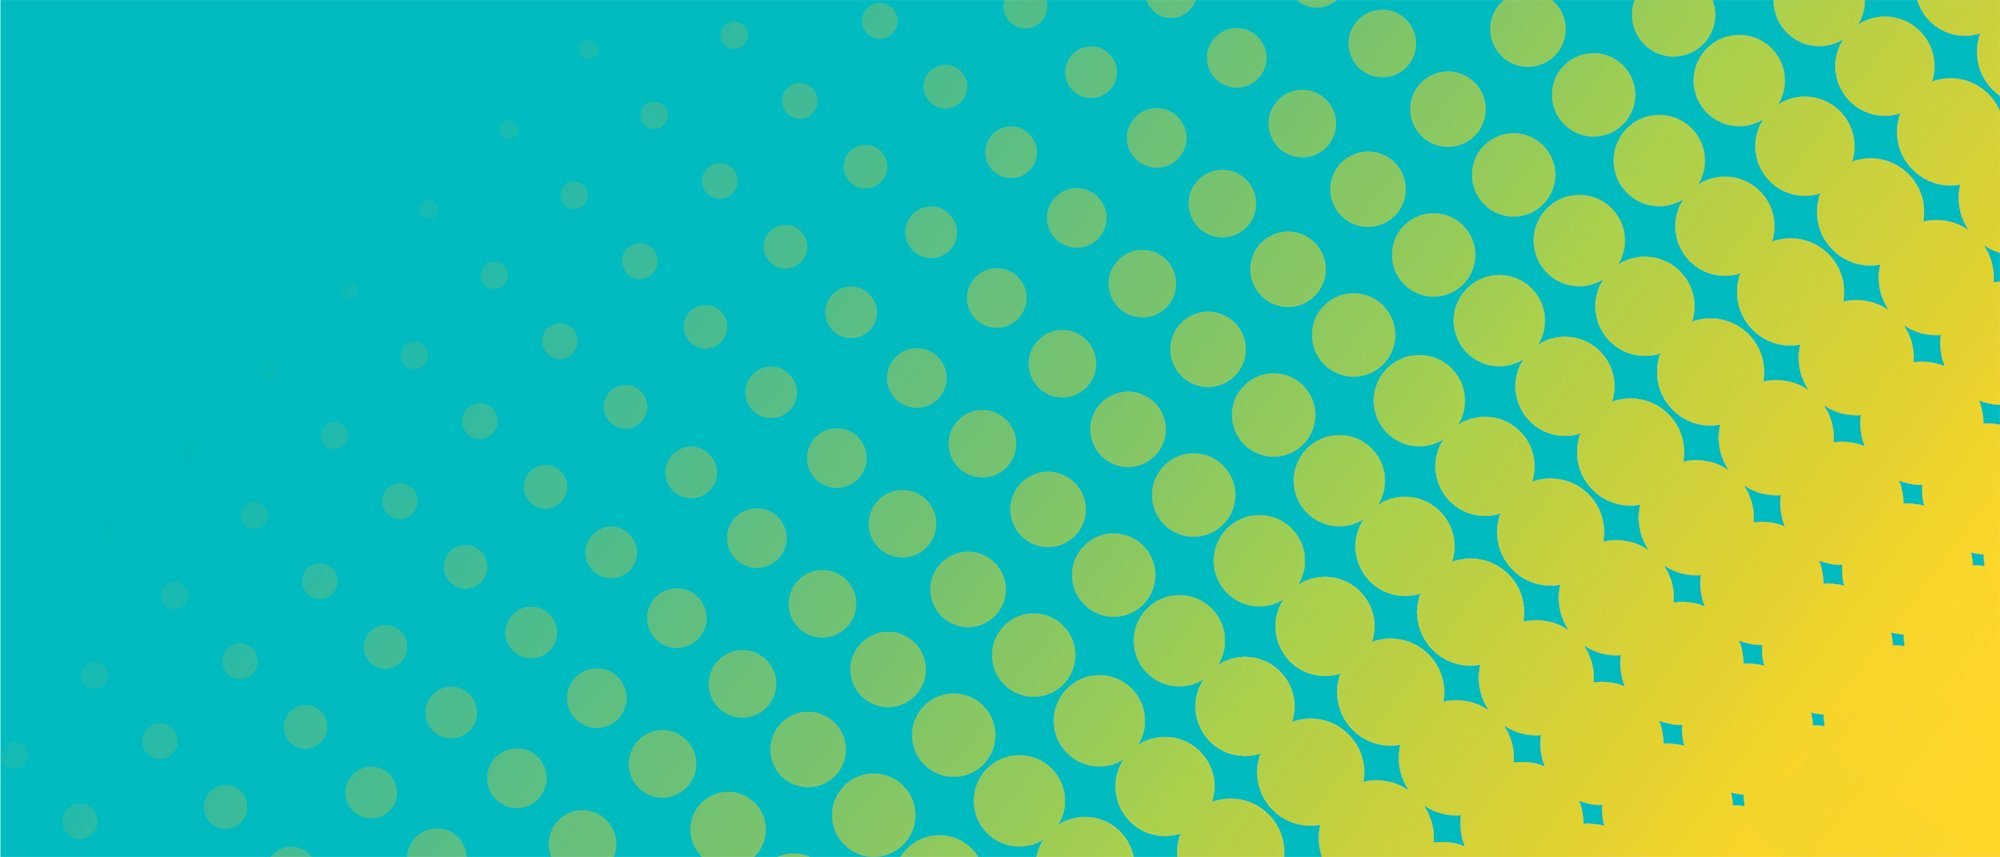 Teal + Yellow - Join the dots- forensic accounting banner